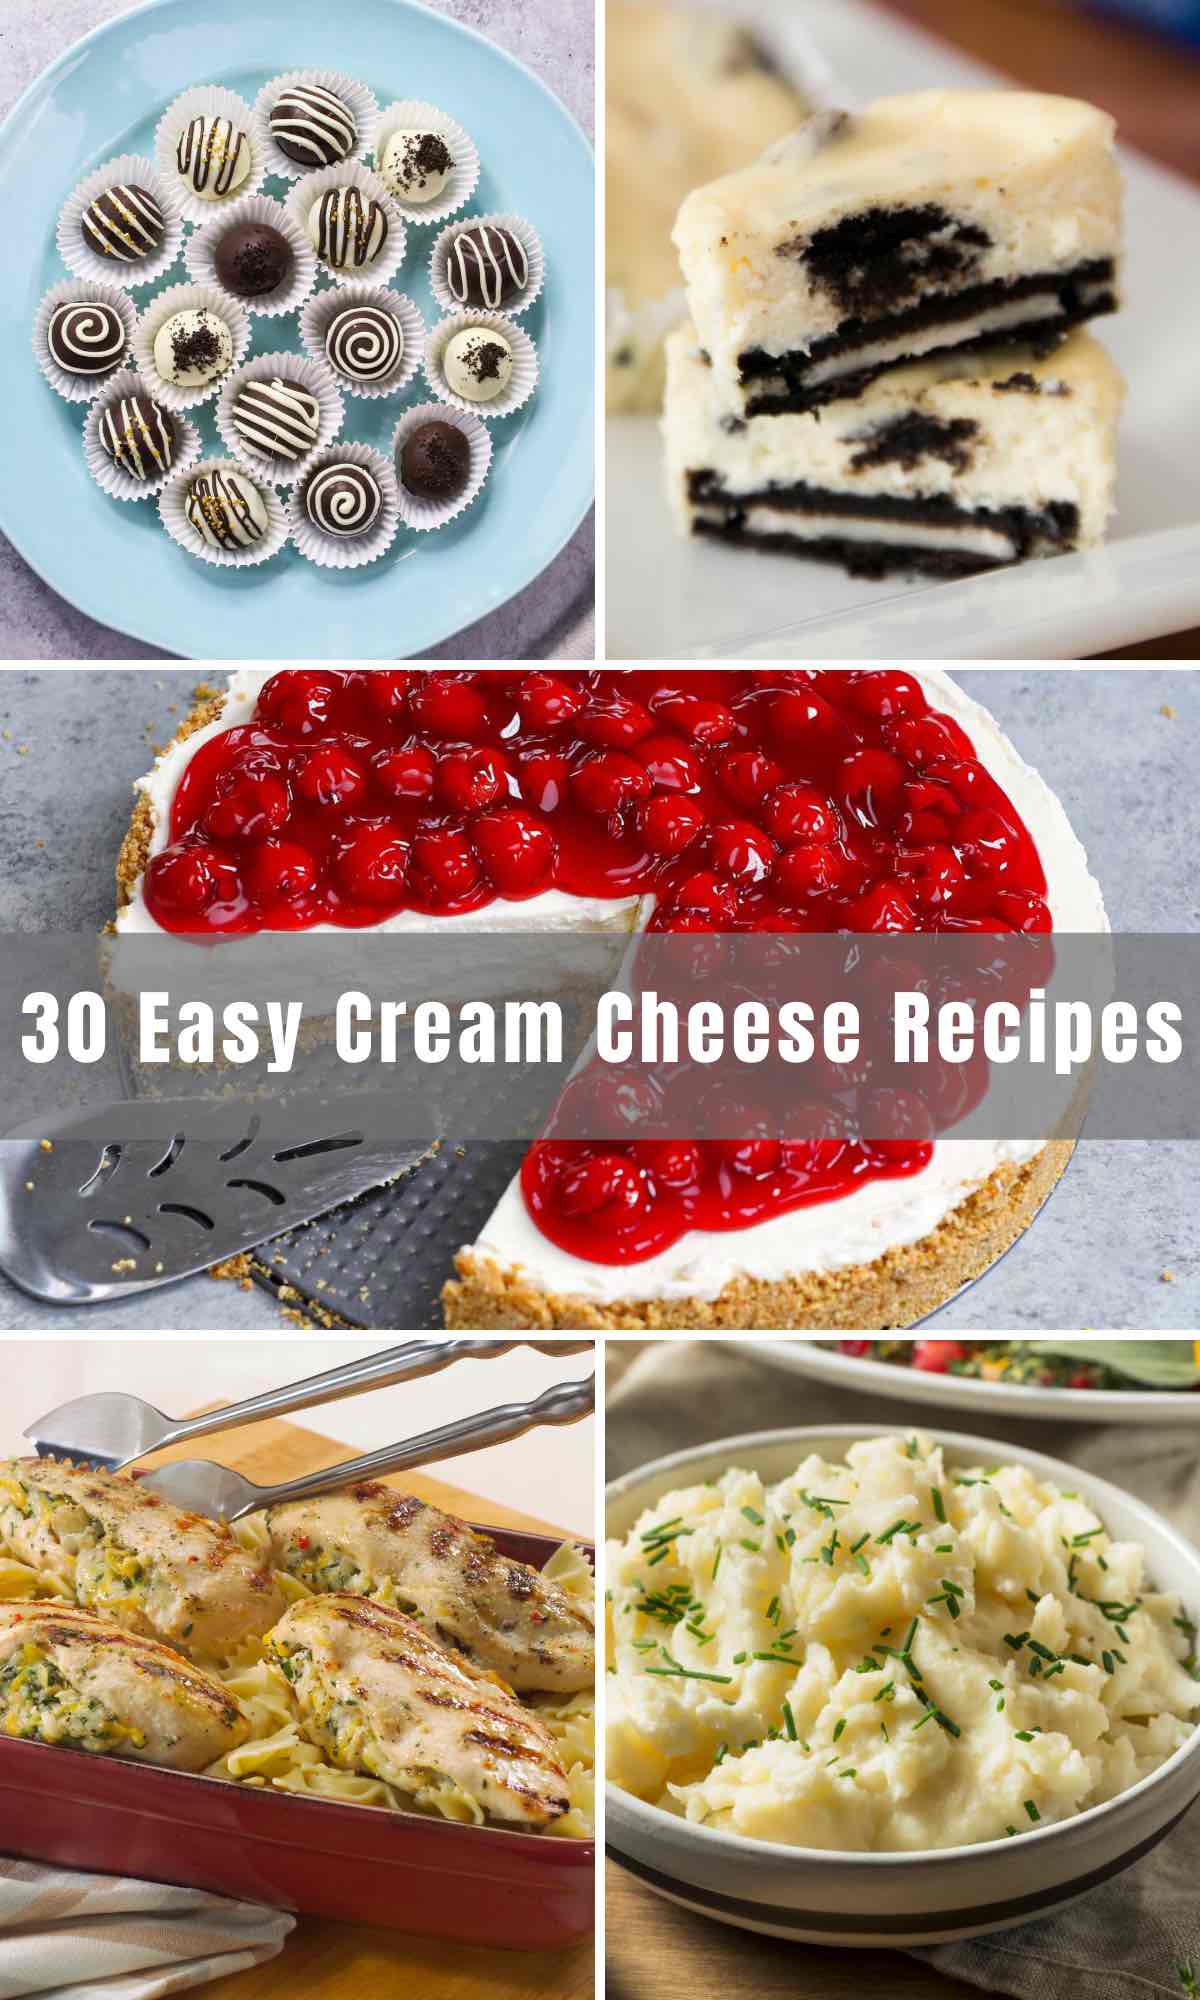 Are you looking to get more creative with cream cheese? How about using it in savory recipes like stuffed chicken or a casserole dish for dinner? Or in a delicious dessert? Below you will find 30 Easy Cream Cheese Recipes that will have you wondering which one to choose first!